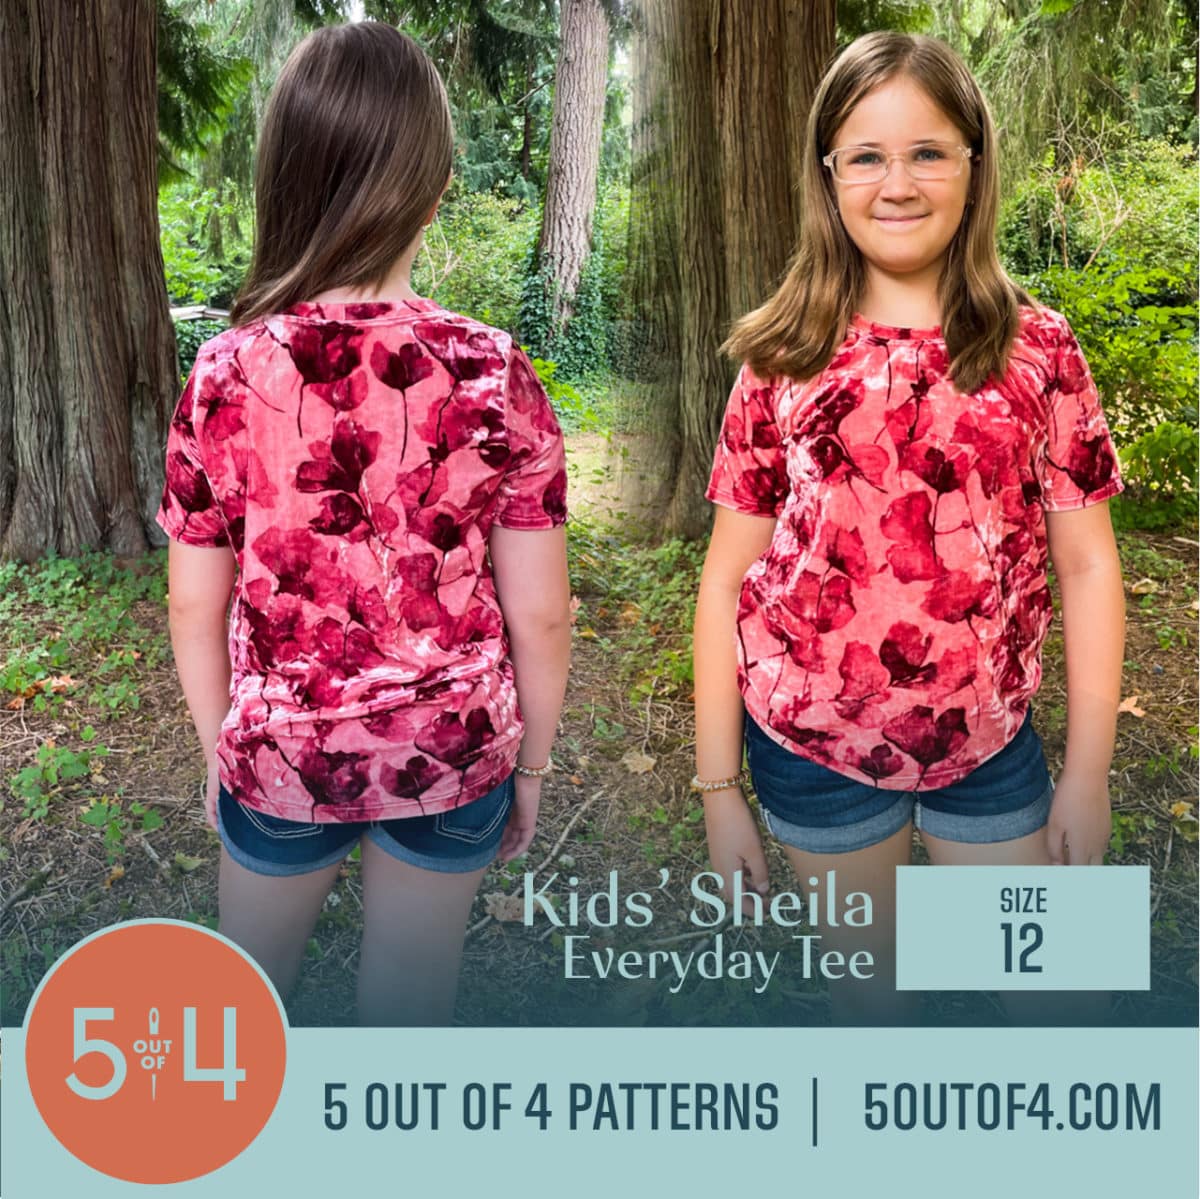 Kids Sheila Everyday Tee and Dress - 5 out of 4 Patterns